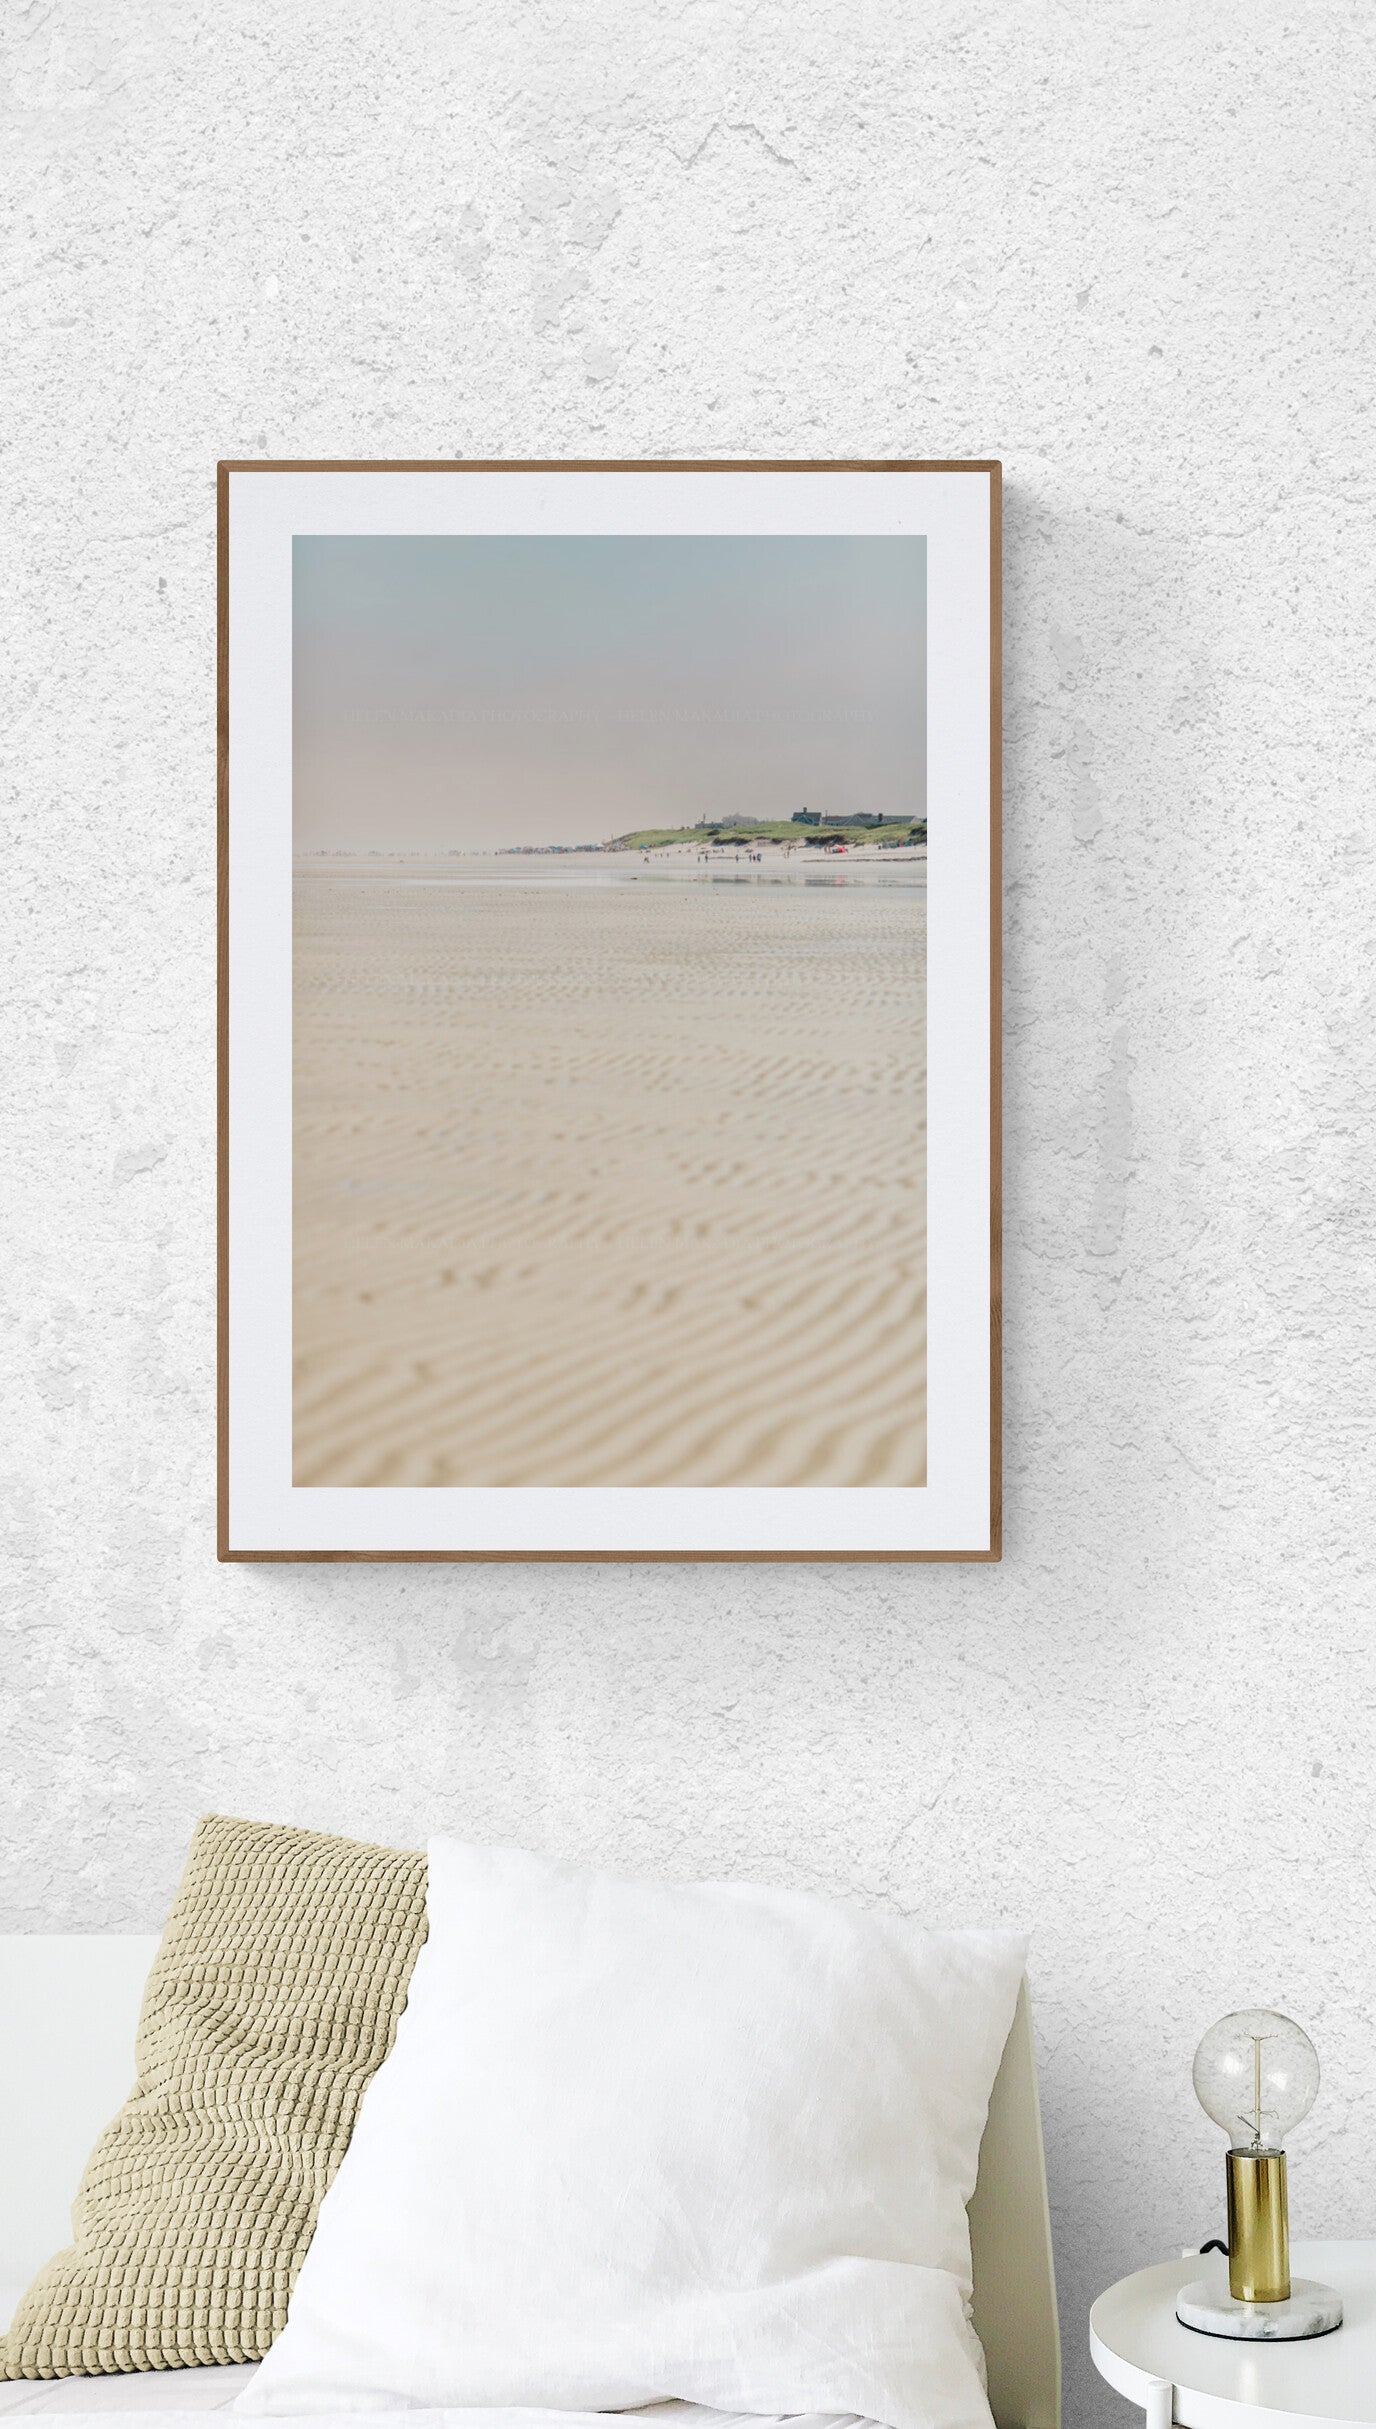 Cape Cod Photograph as Wall Art in a Bedroom